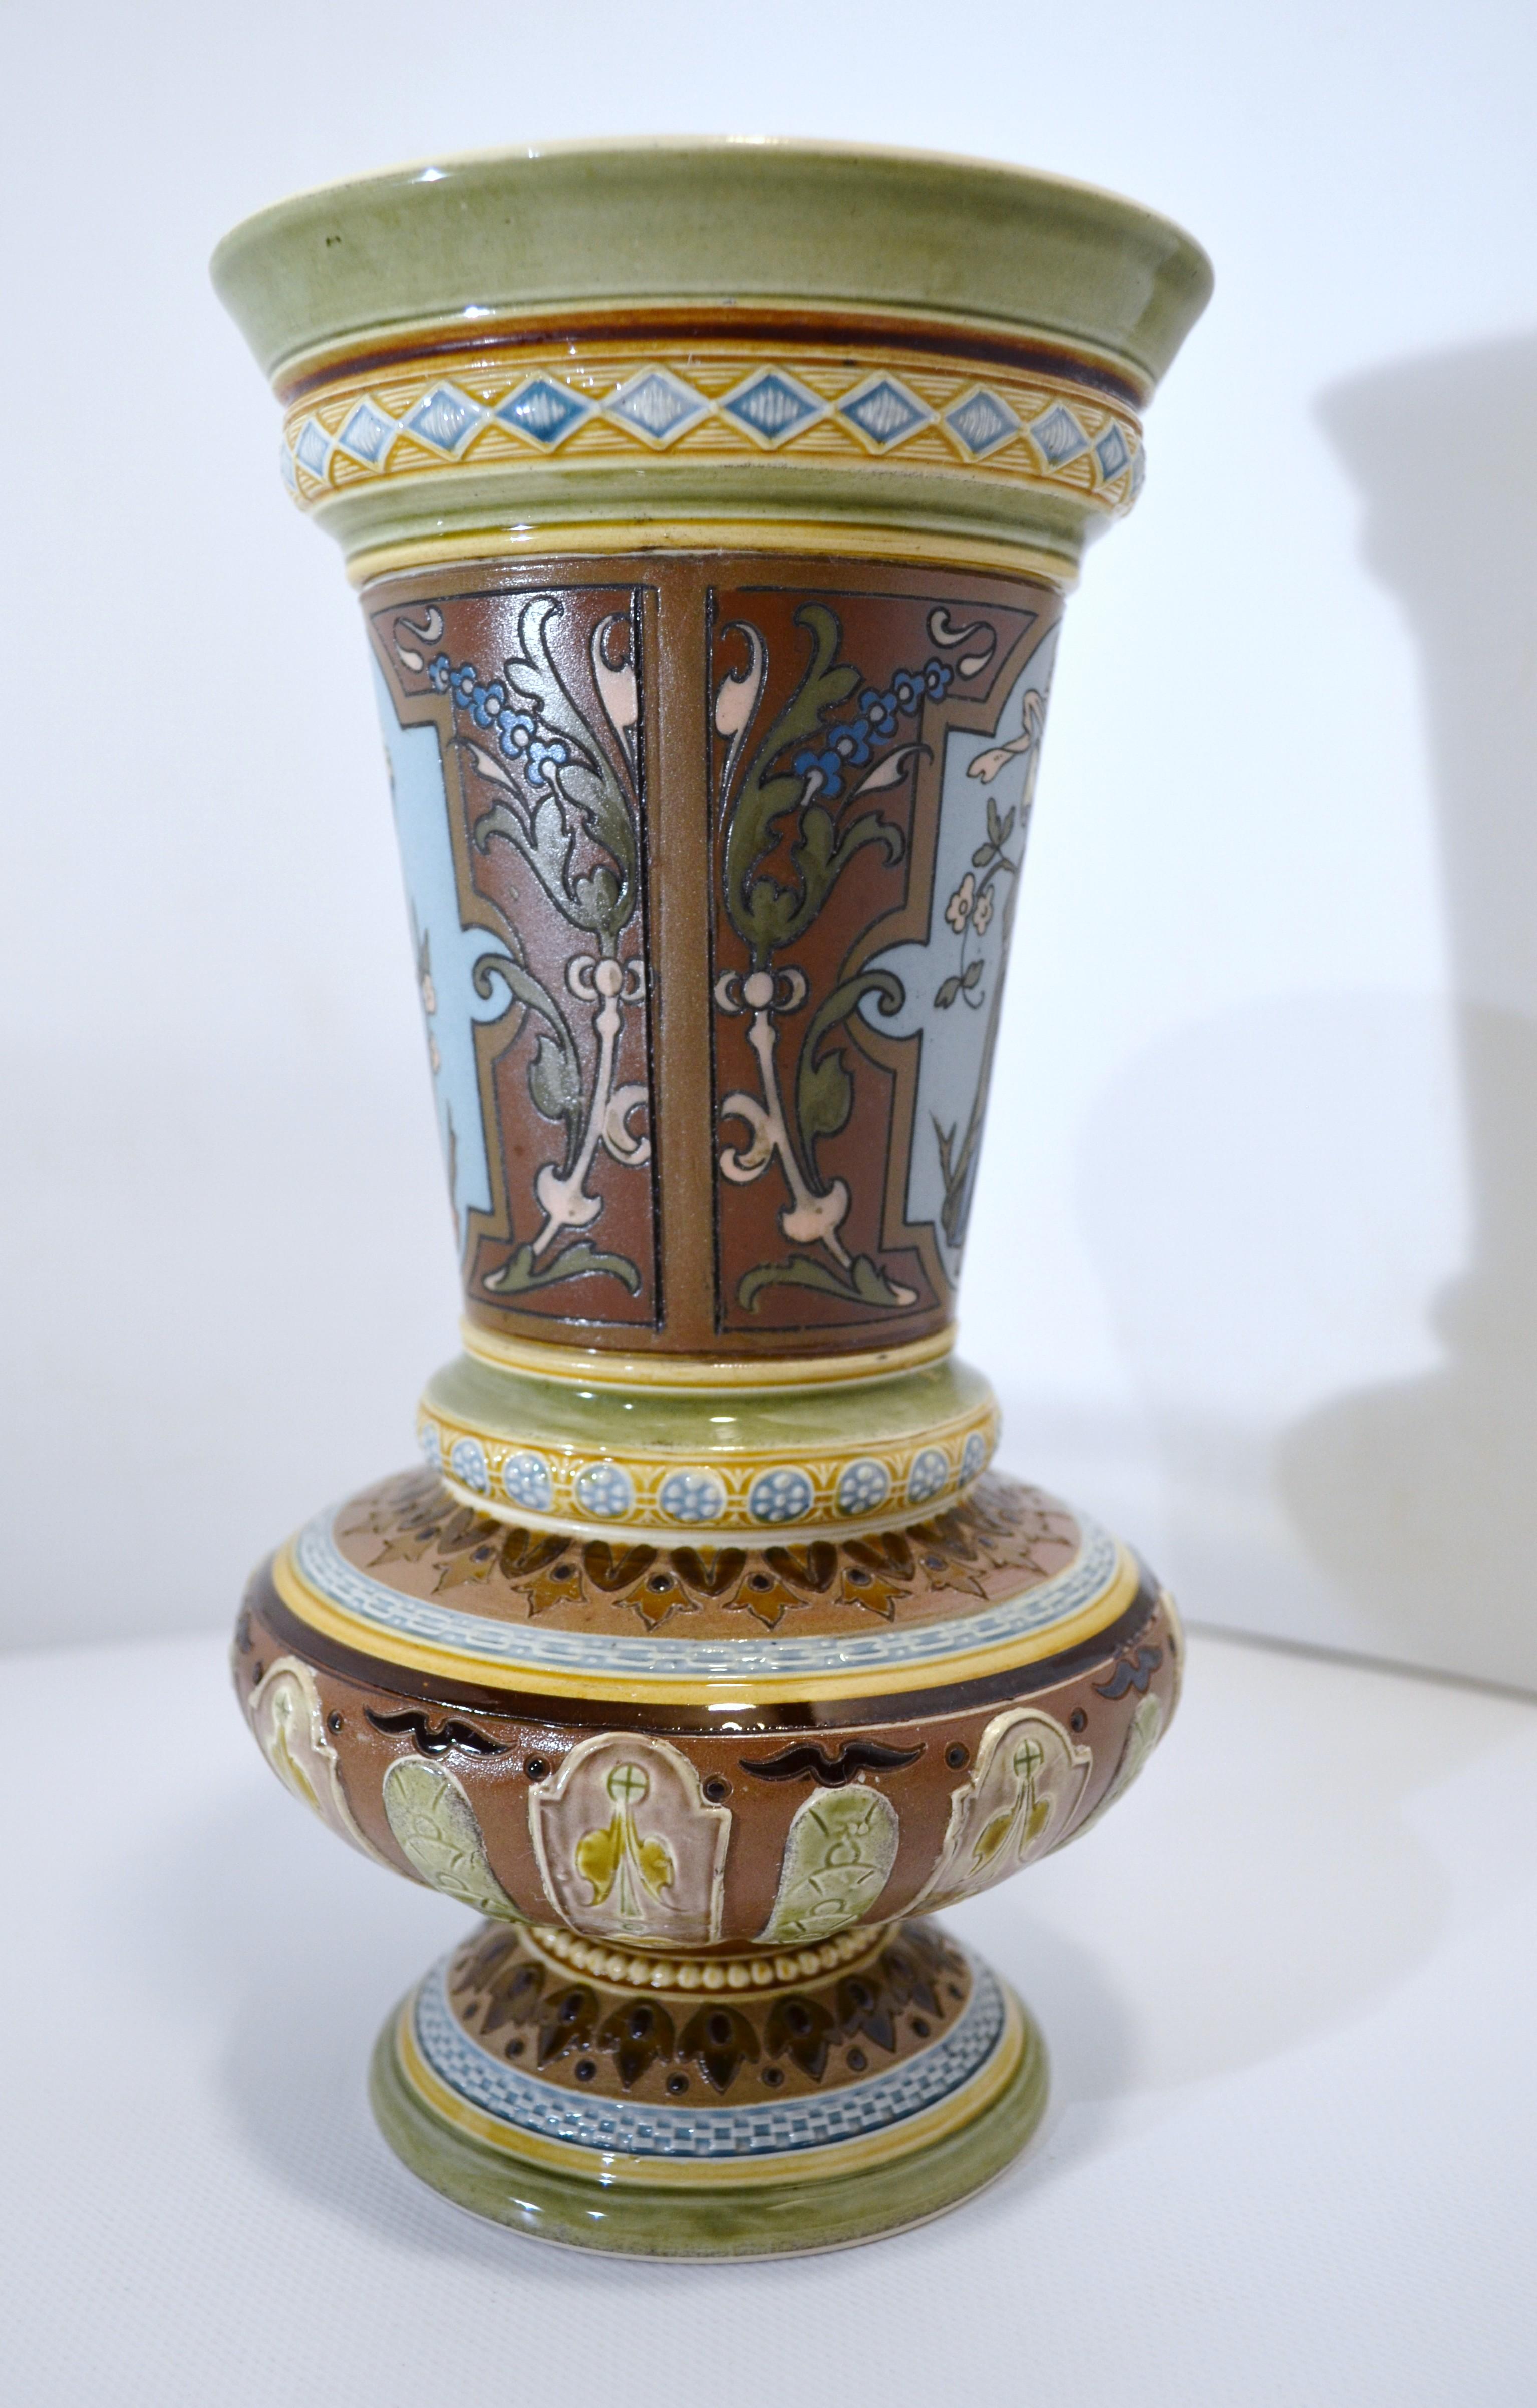 Engraved Villeroy and Boch Mettlach 1890 1900 Mosaic Ceramic Vase Decorated with Women For Sale